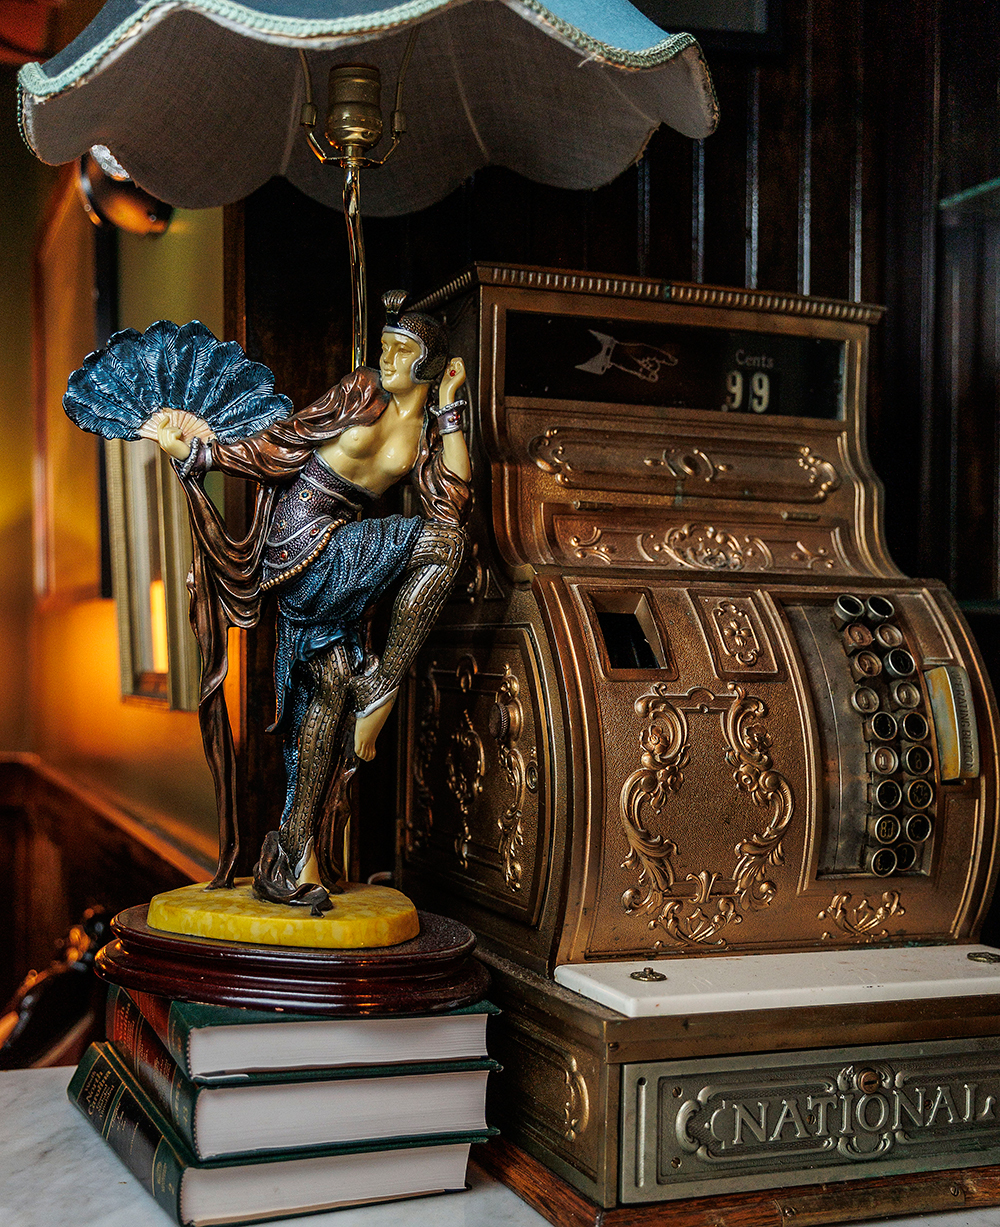 Watts & Ward is filled with vintage knickknacks from bygone times